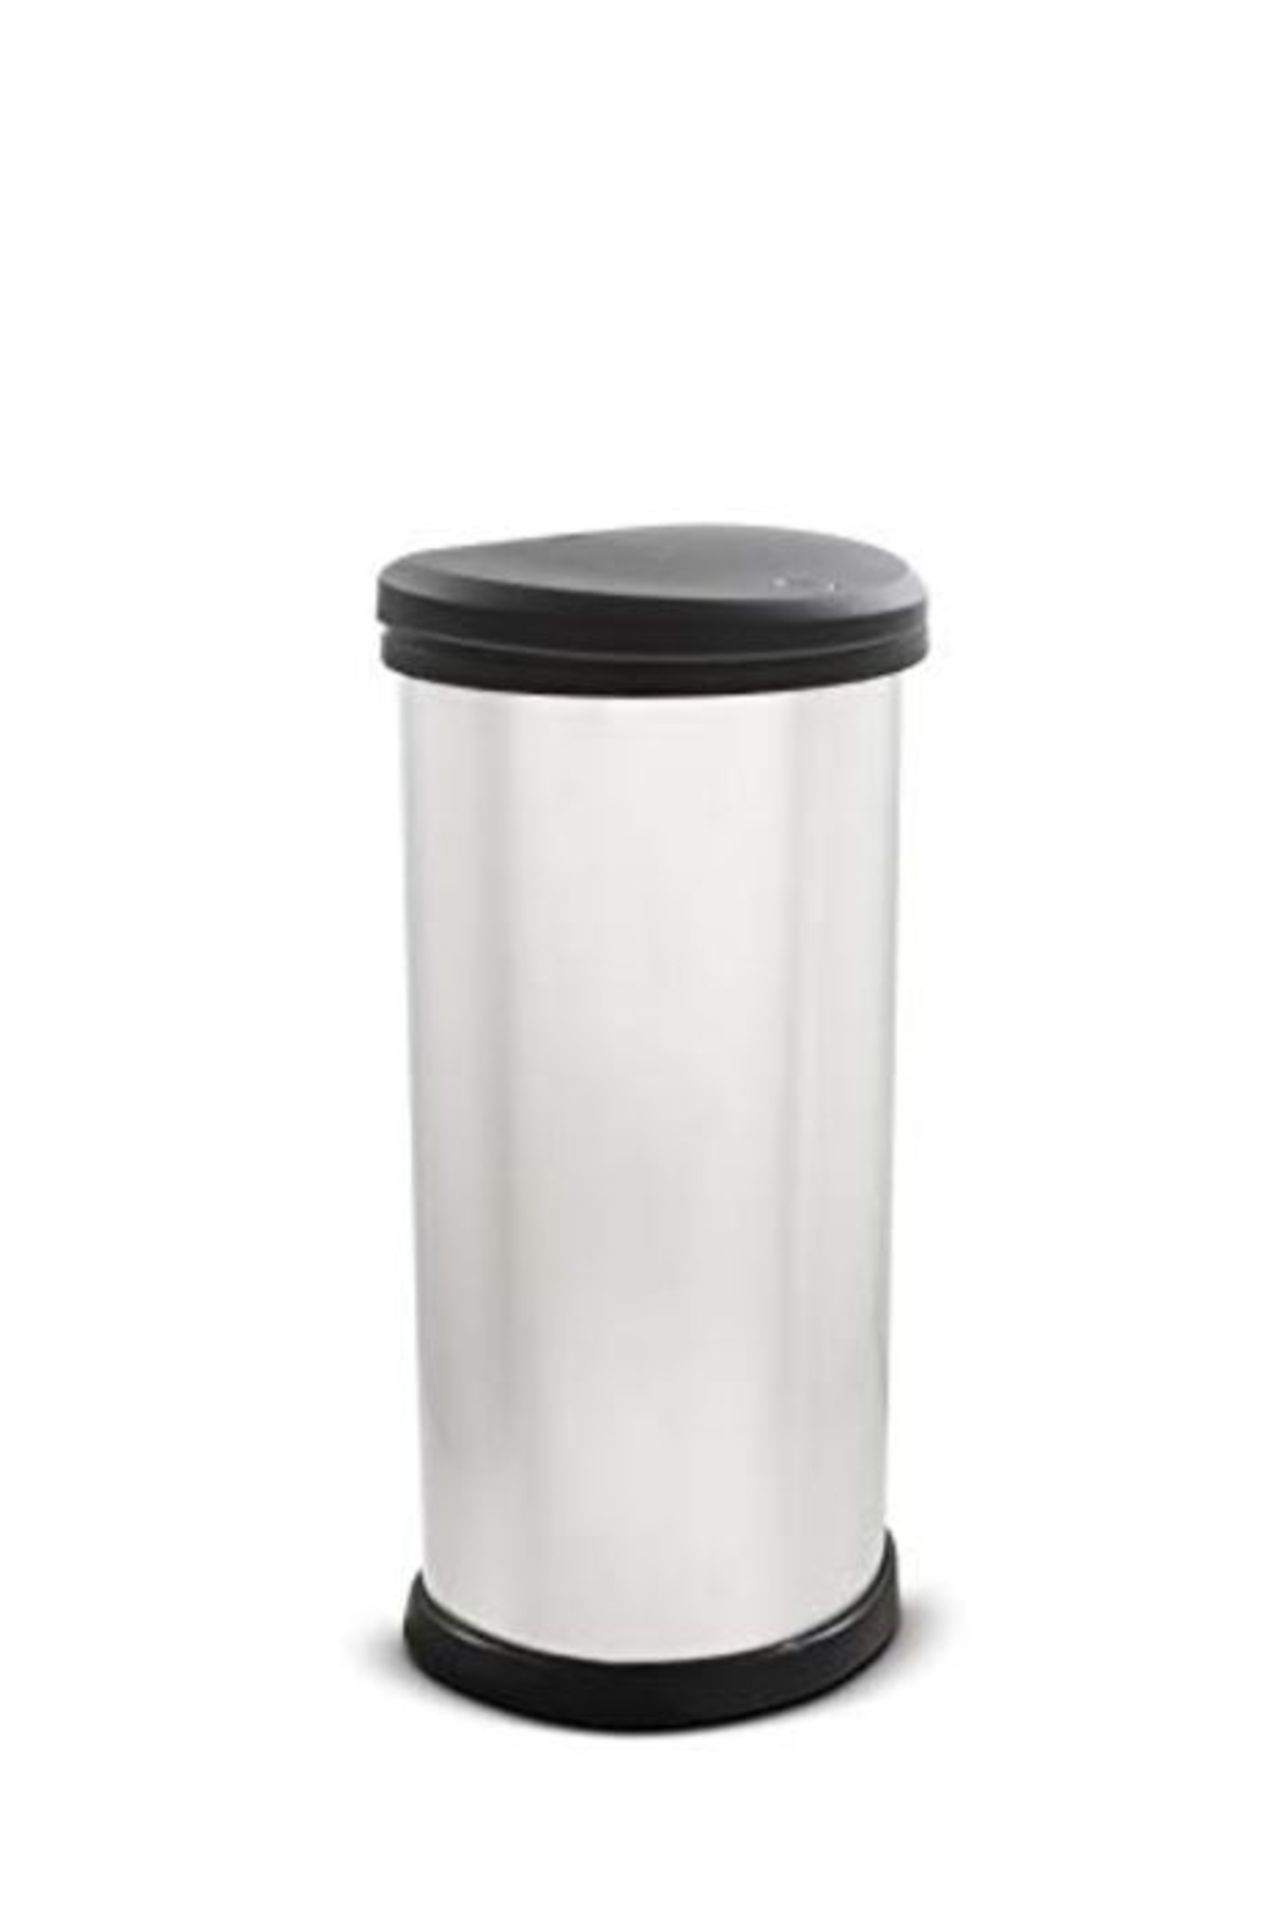 Curver Metal Effect Plastic One Touch Deco Bin, Silver, 40 Litre